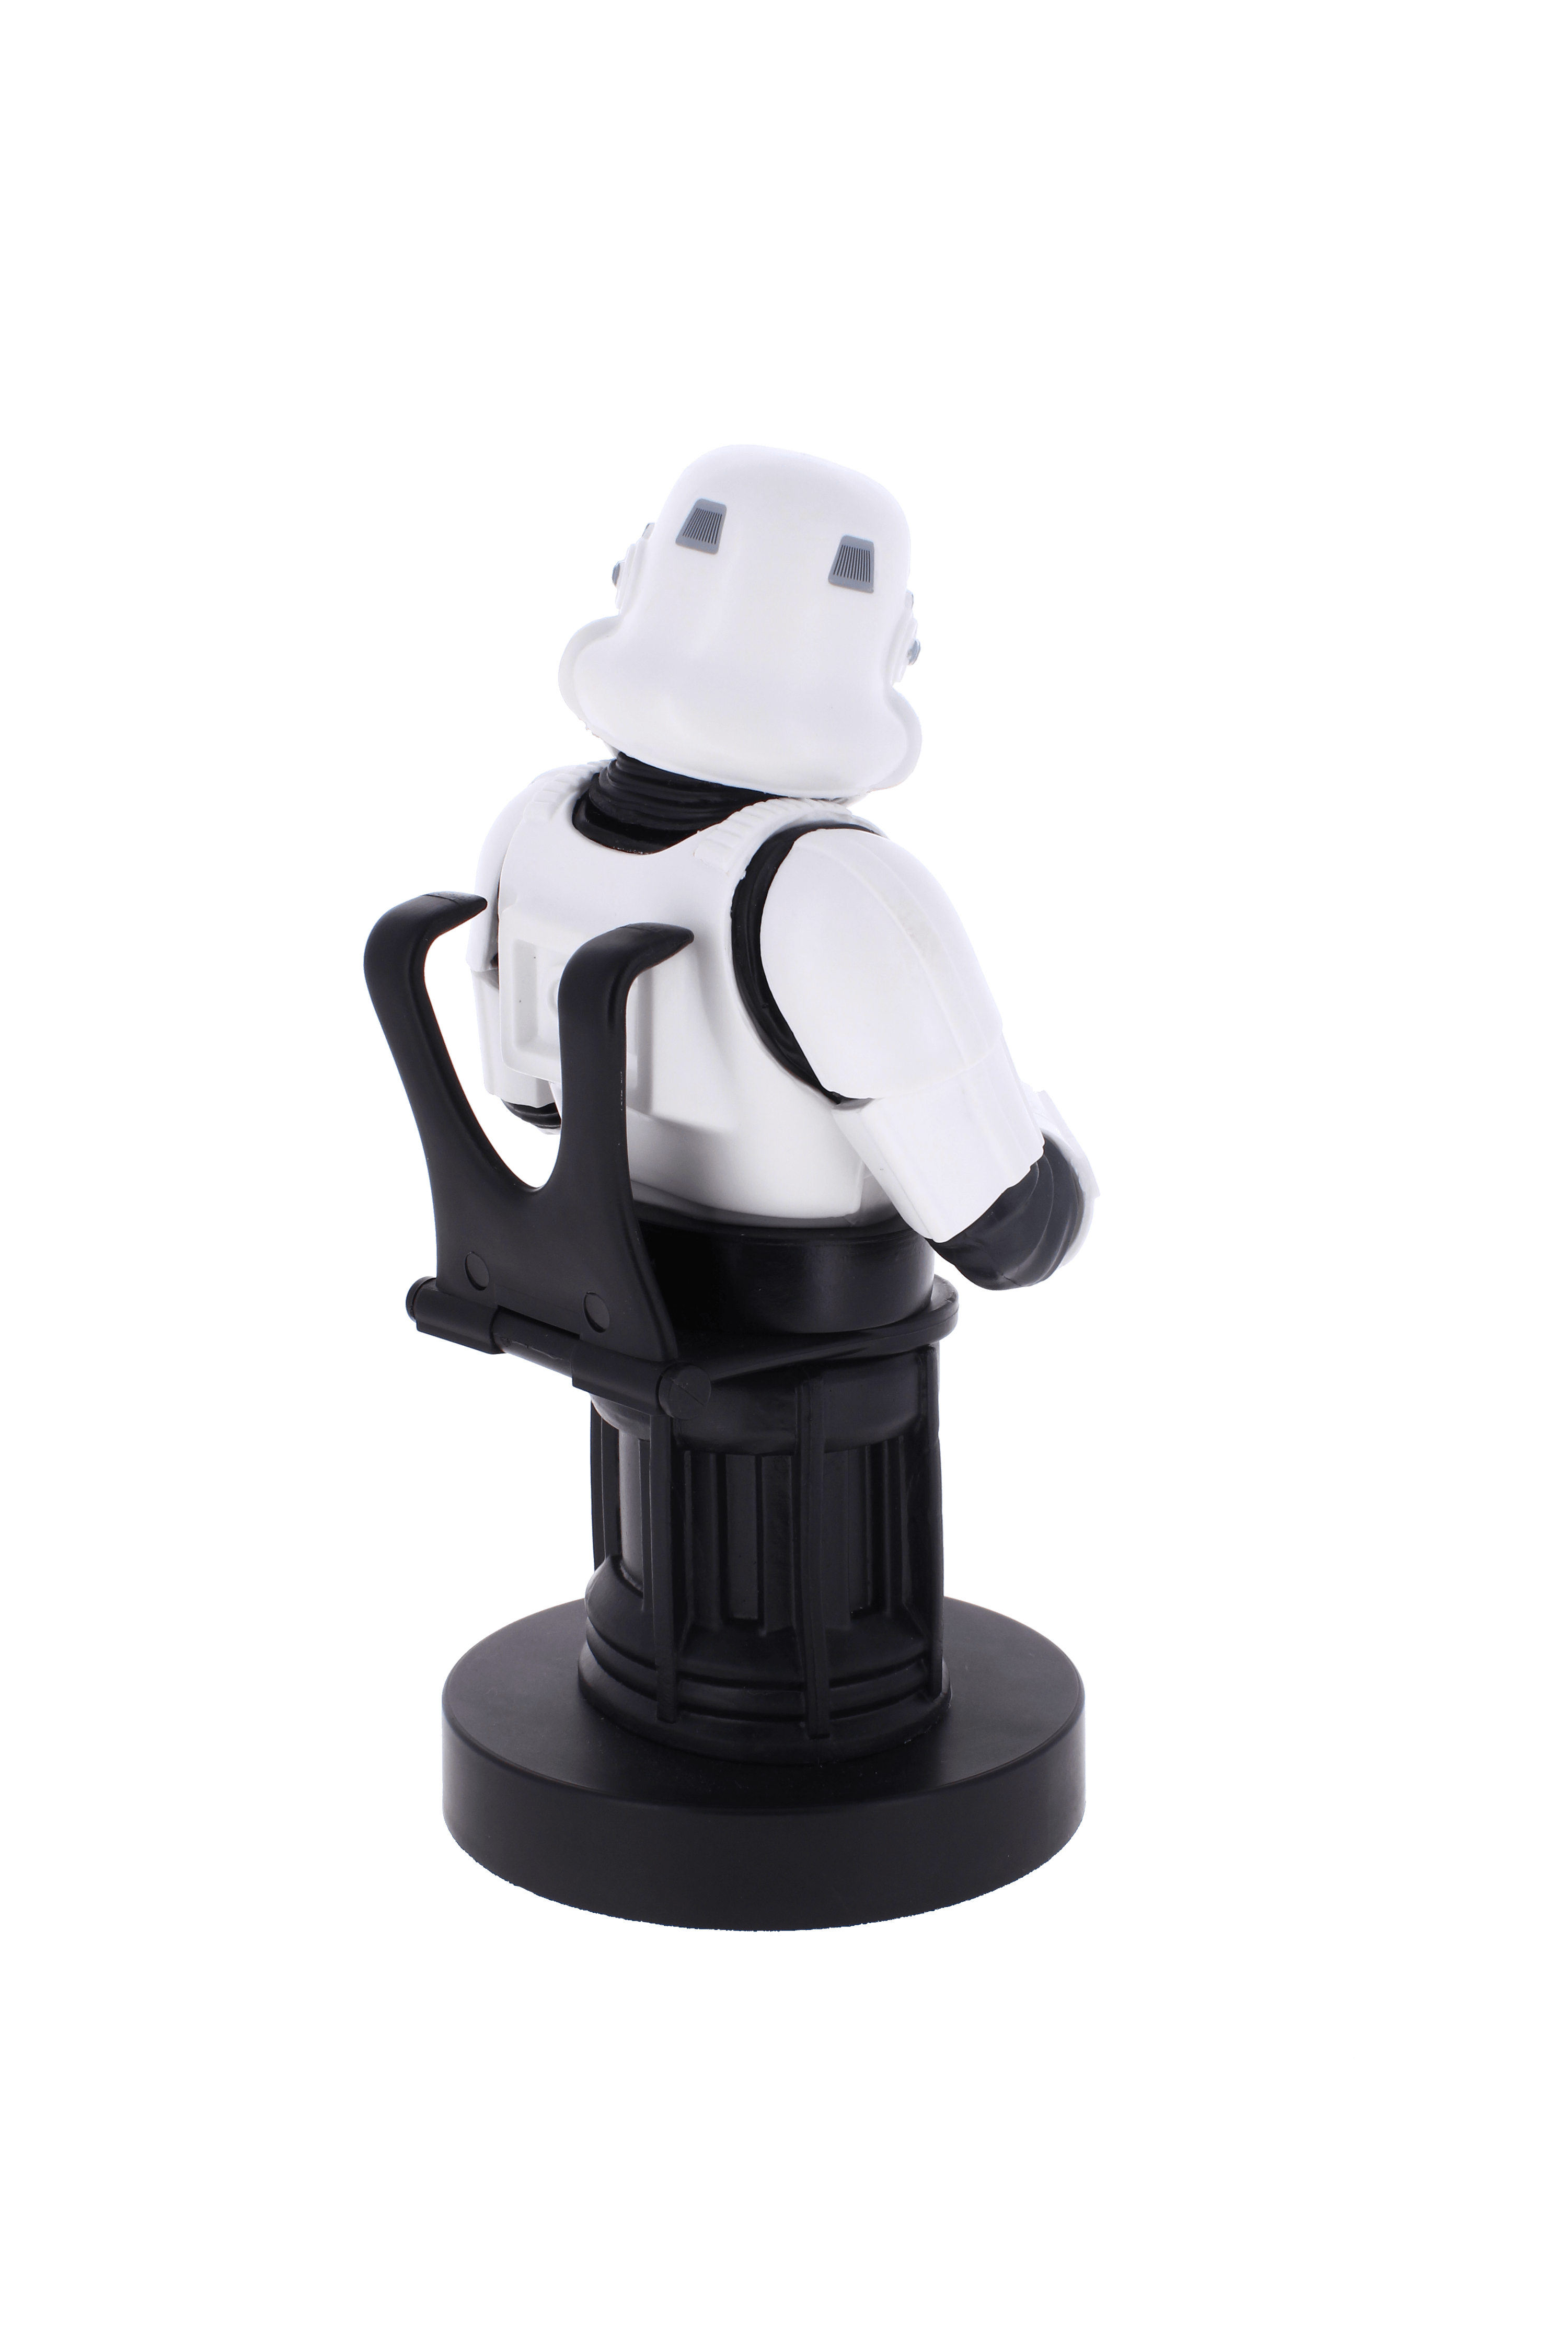 Cable Guys - Star Wars - Imperial Stormtrooper - Phone & Controller Holder - The Card Vault